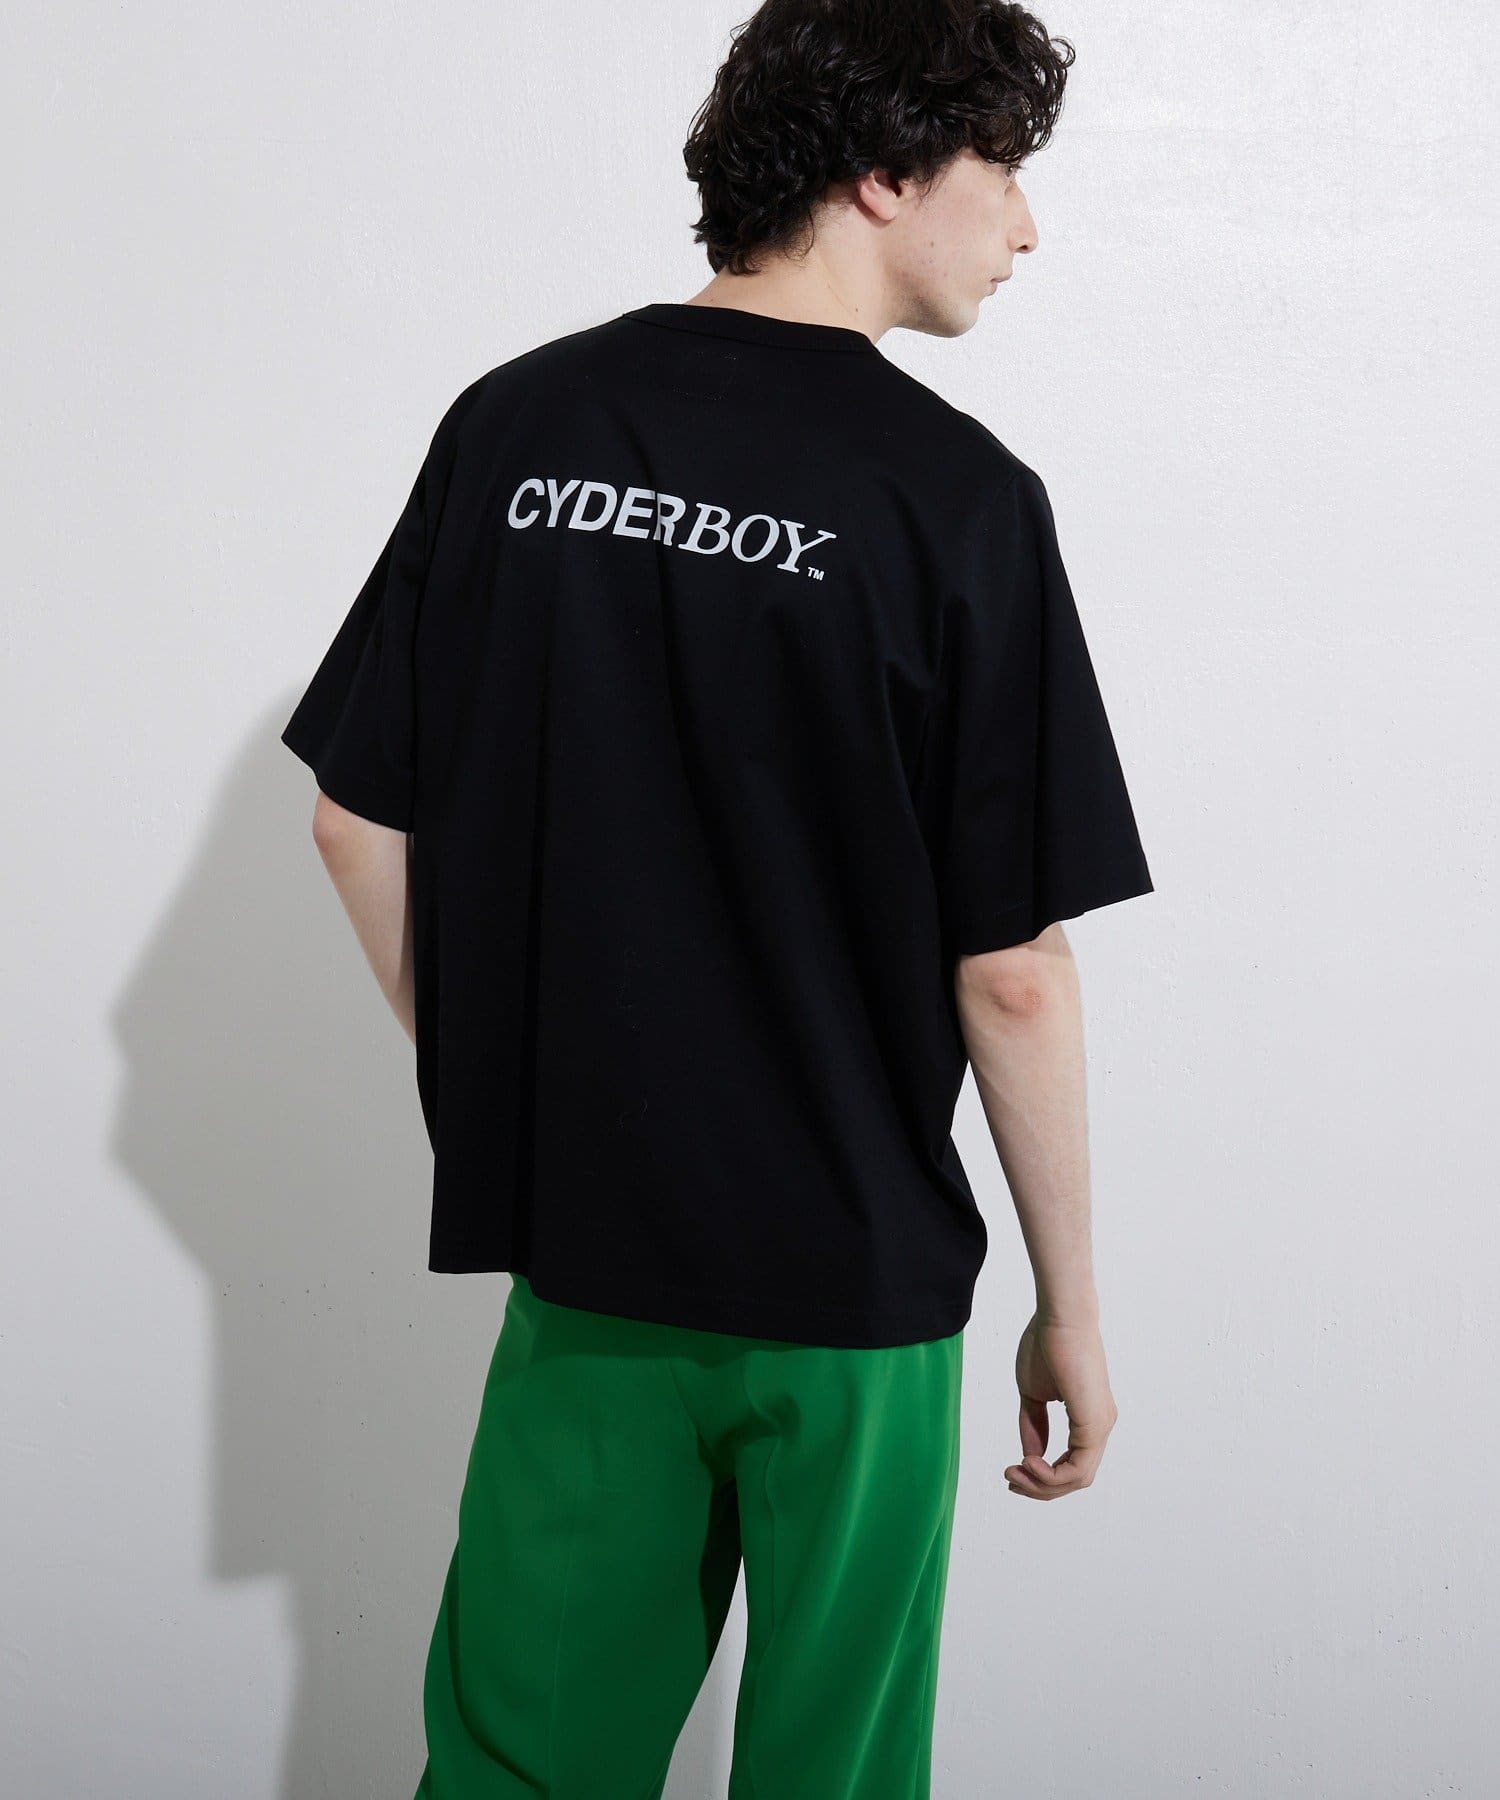 Lui's(ルイス) 【CYDER BOY for Lui's 】exclusive TEE